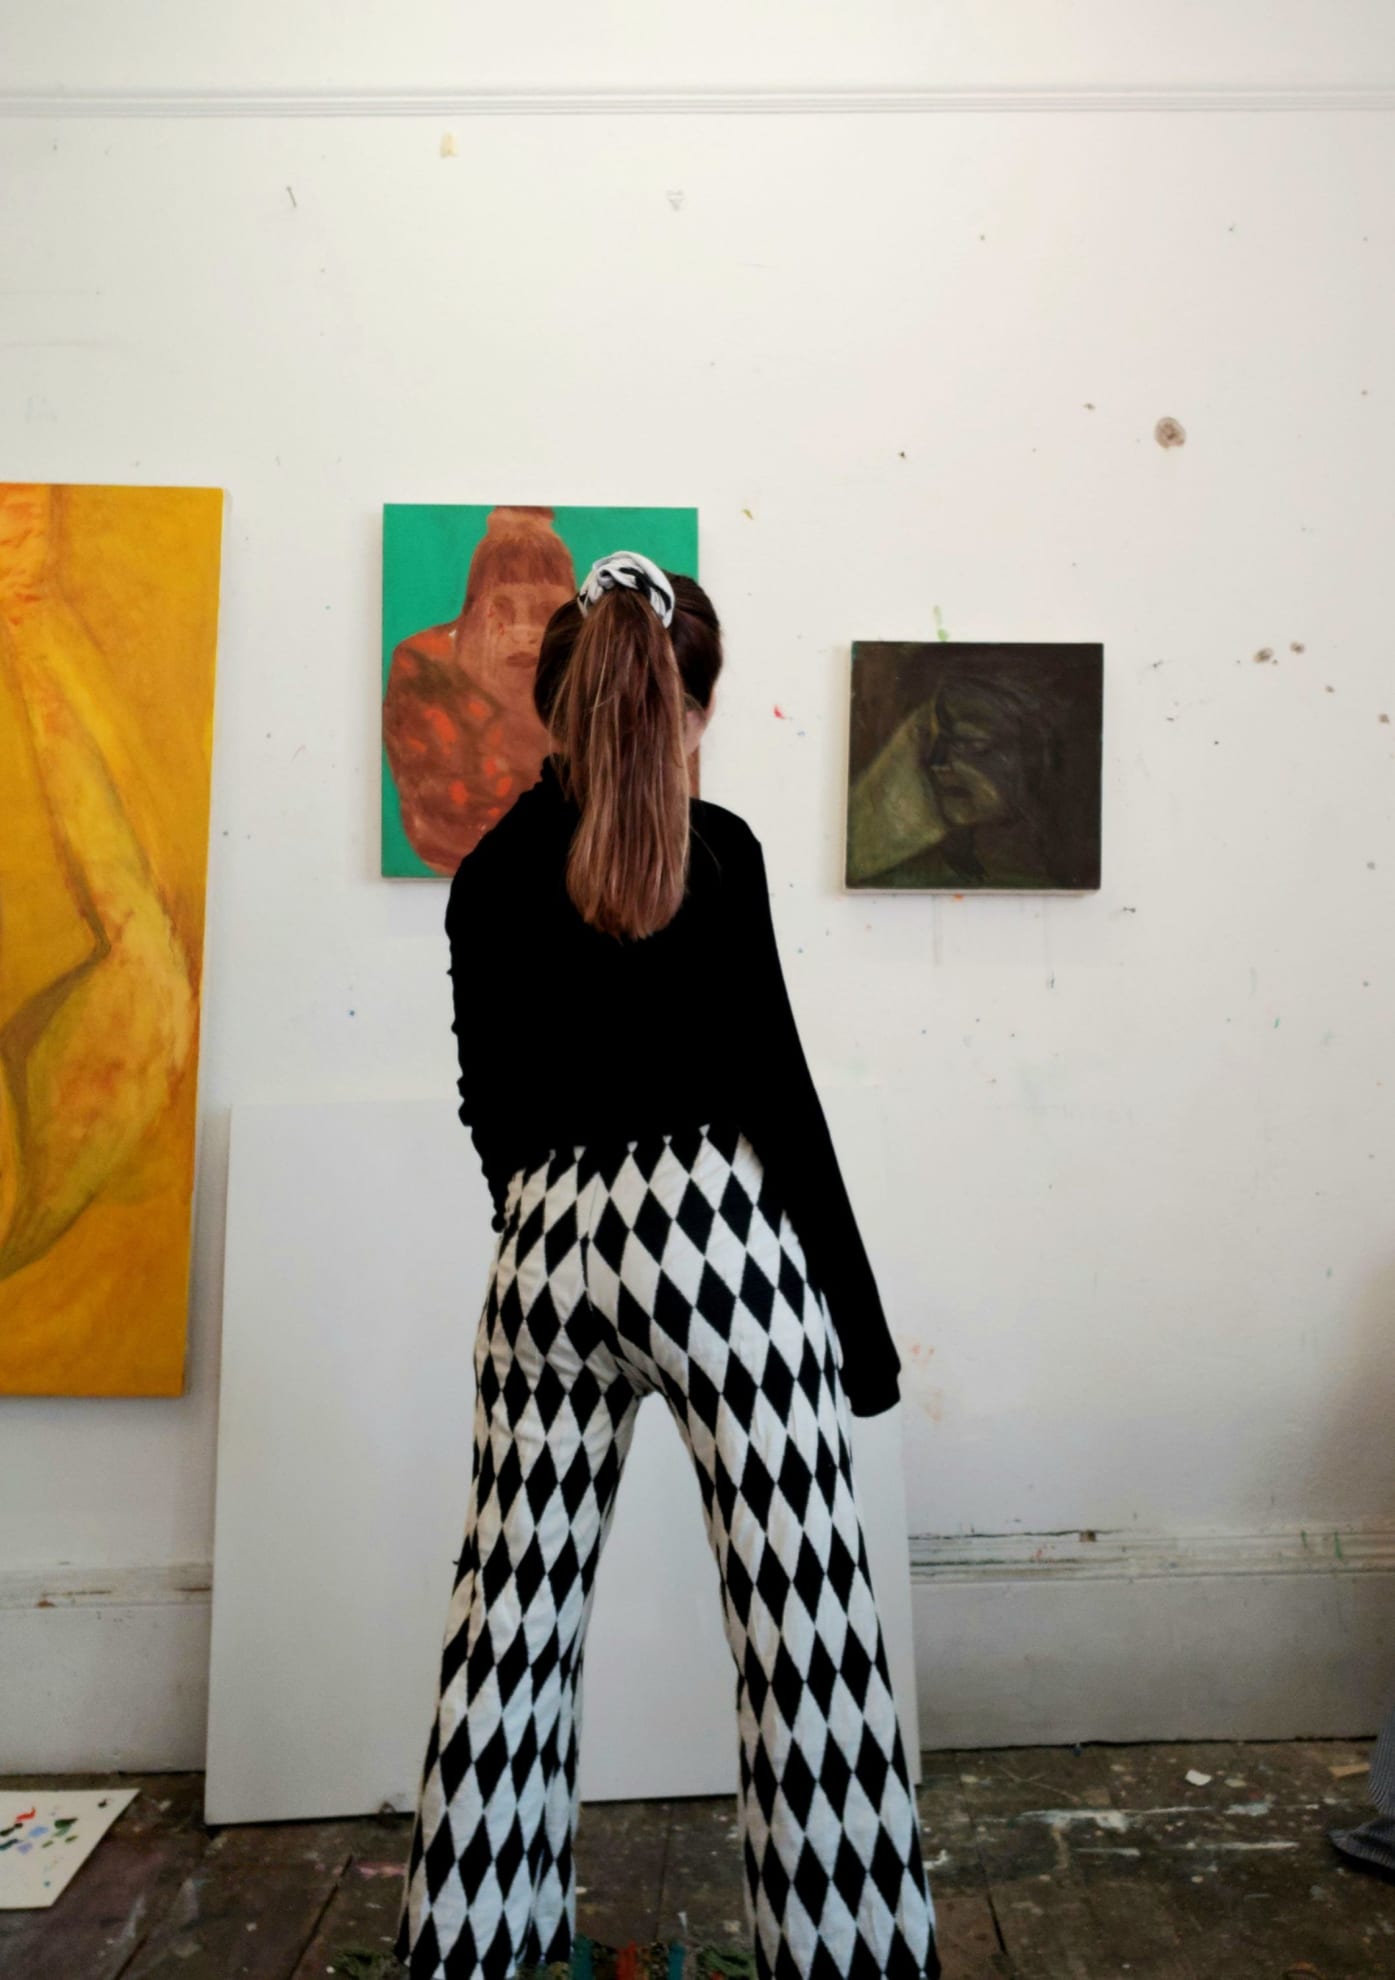 Oriele stands facing the wall of a studio. Her paintings line the wall in a row of three. Oriele is wearing black and white, boldly patterned trousers and black top. Her hair is tied up in a ponytail. 